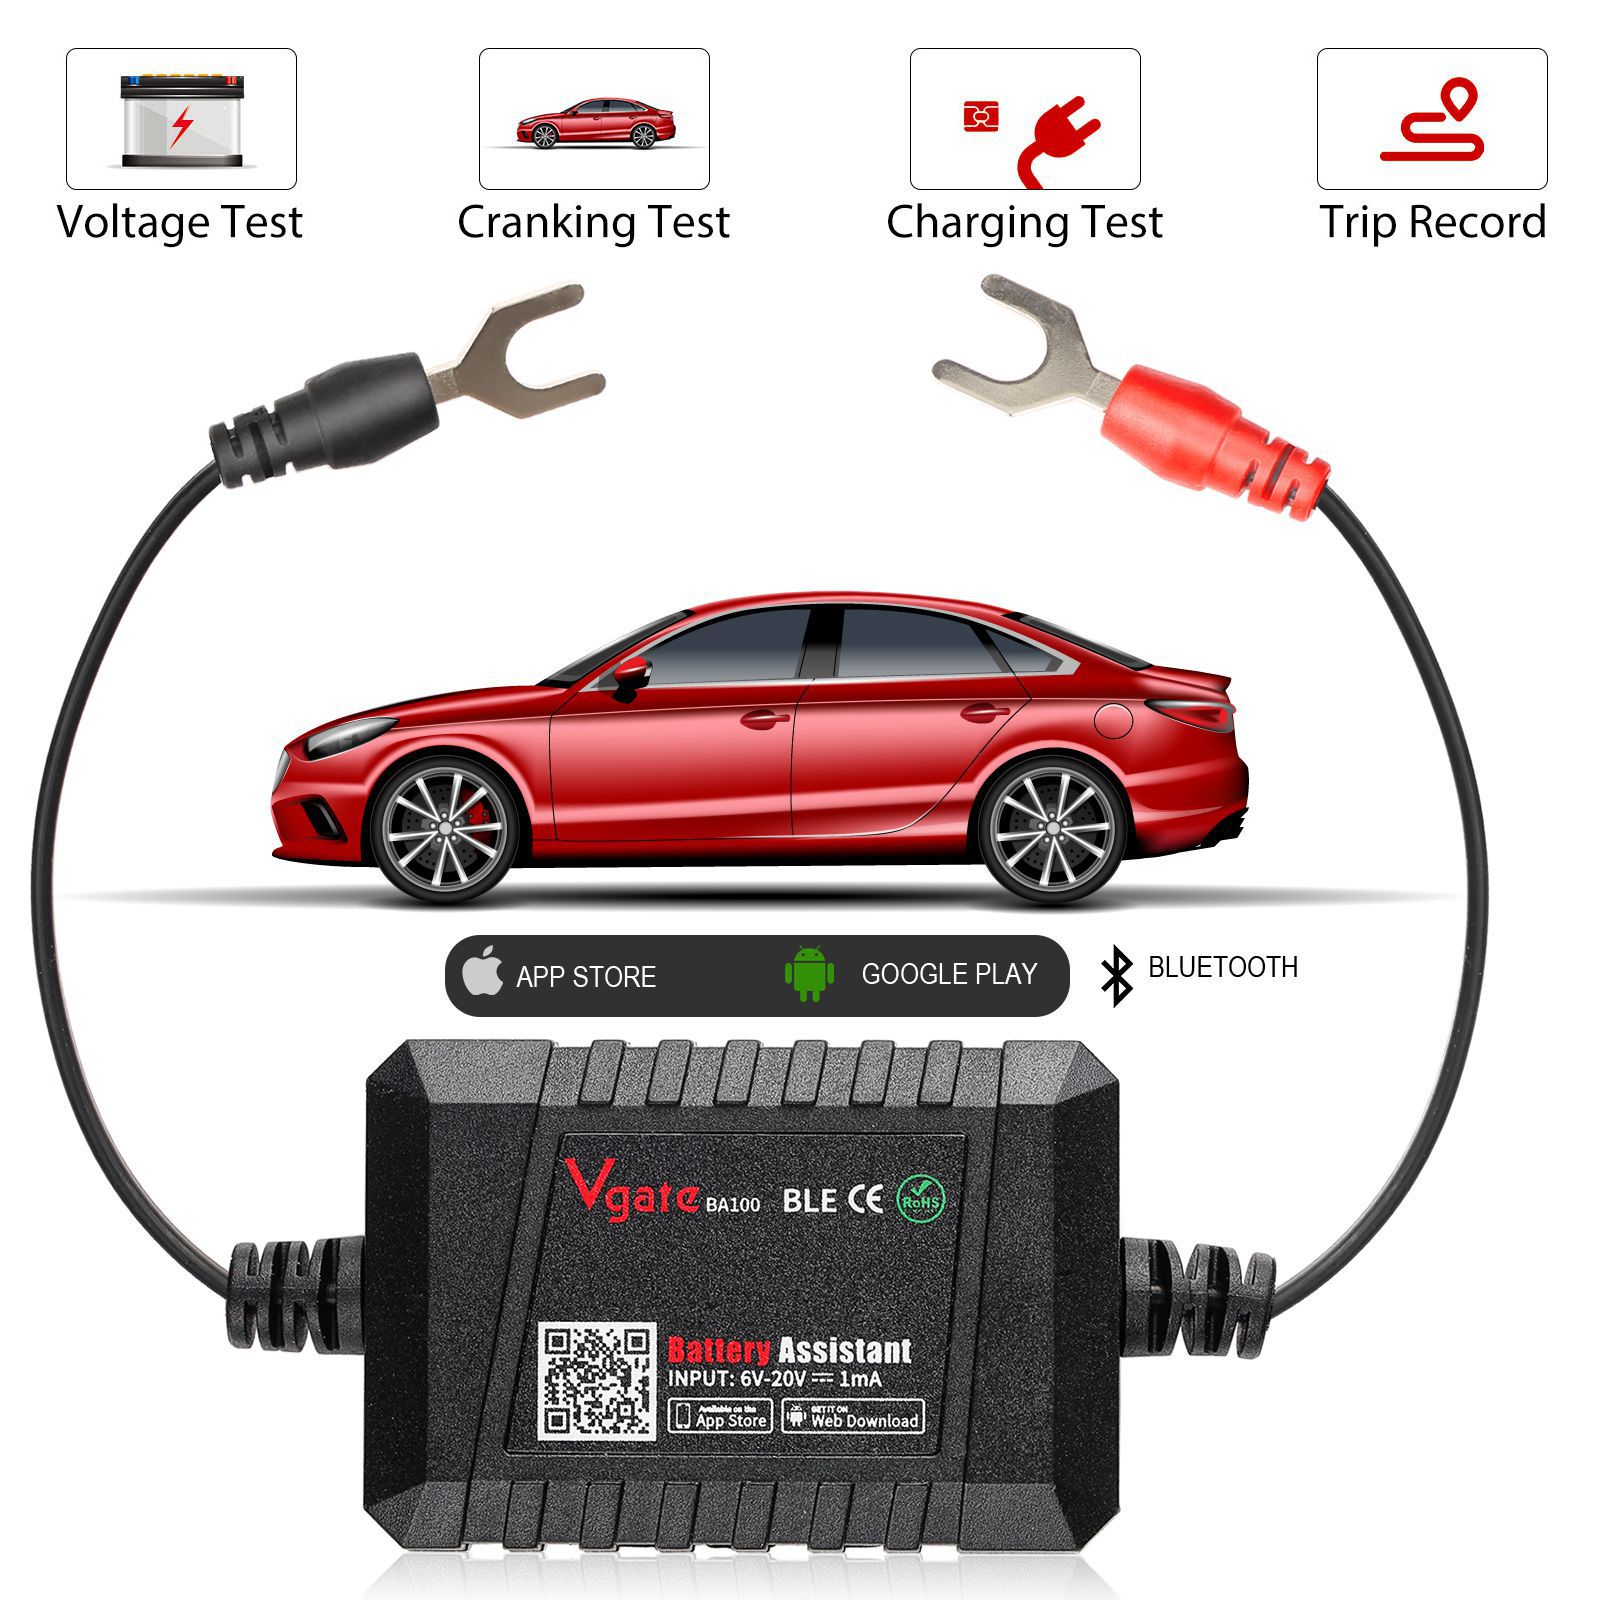 GODIAG GB101 Battery Assistant BlueTooth 4.0 Wireless 6-20V Automotive Battery Load Tester Diagnostic Analyzer Monitor para Android & iOS